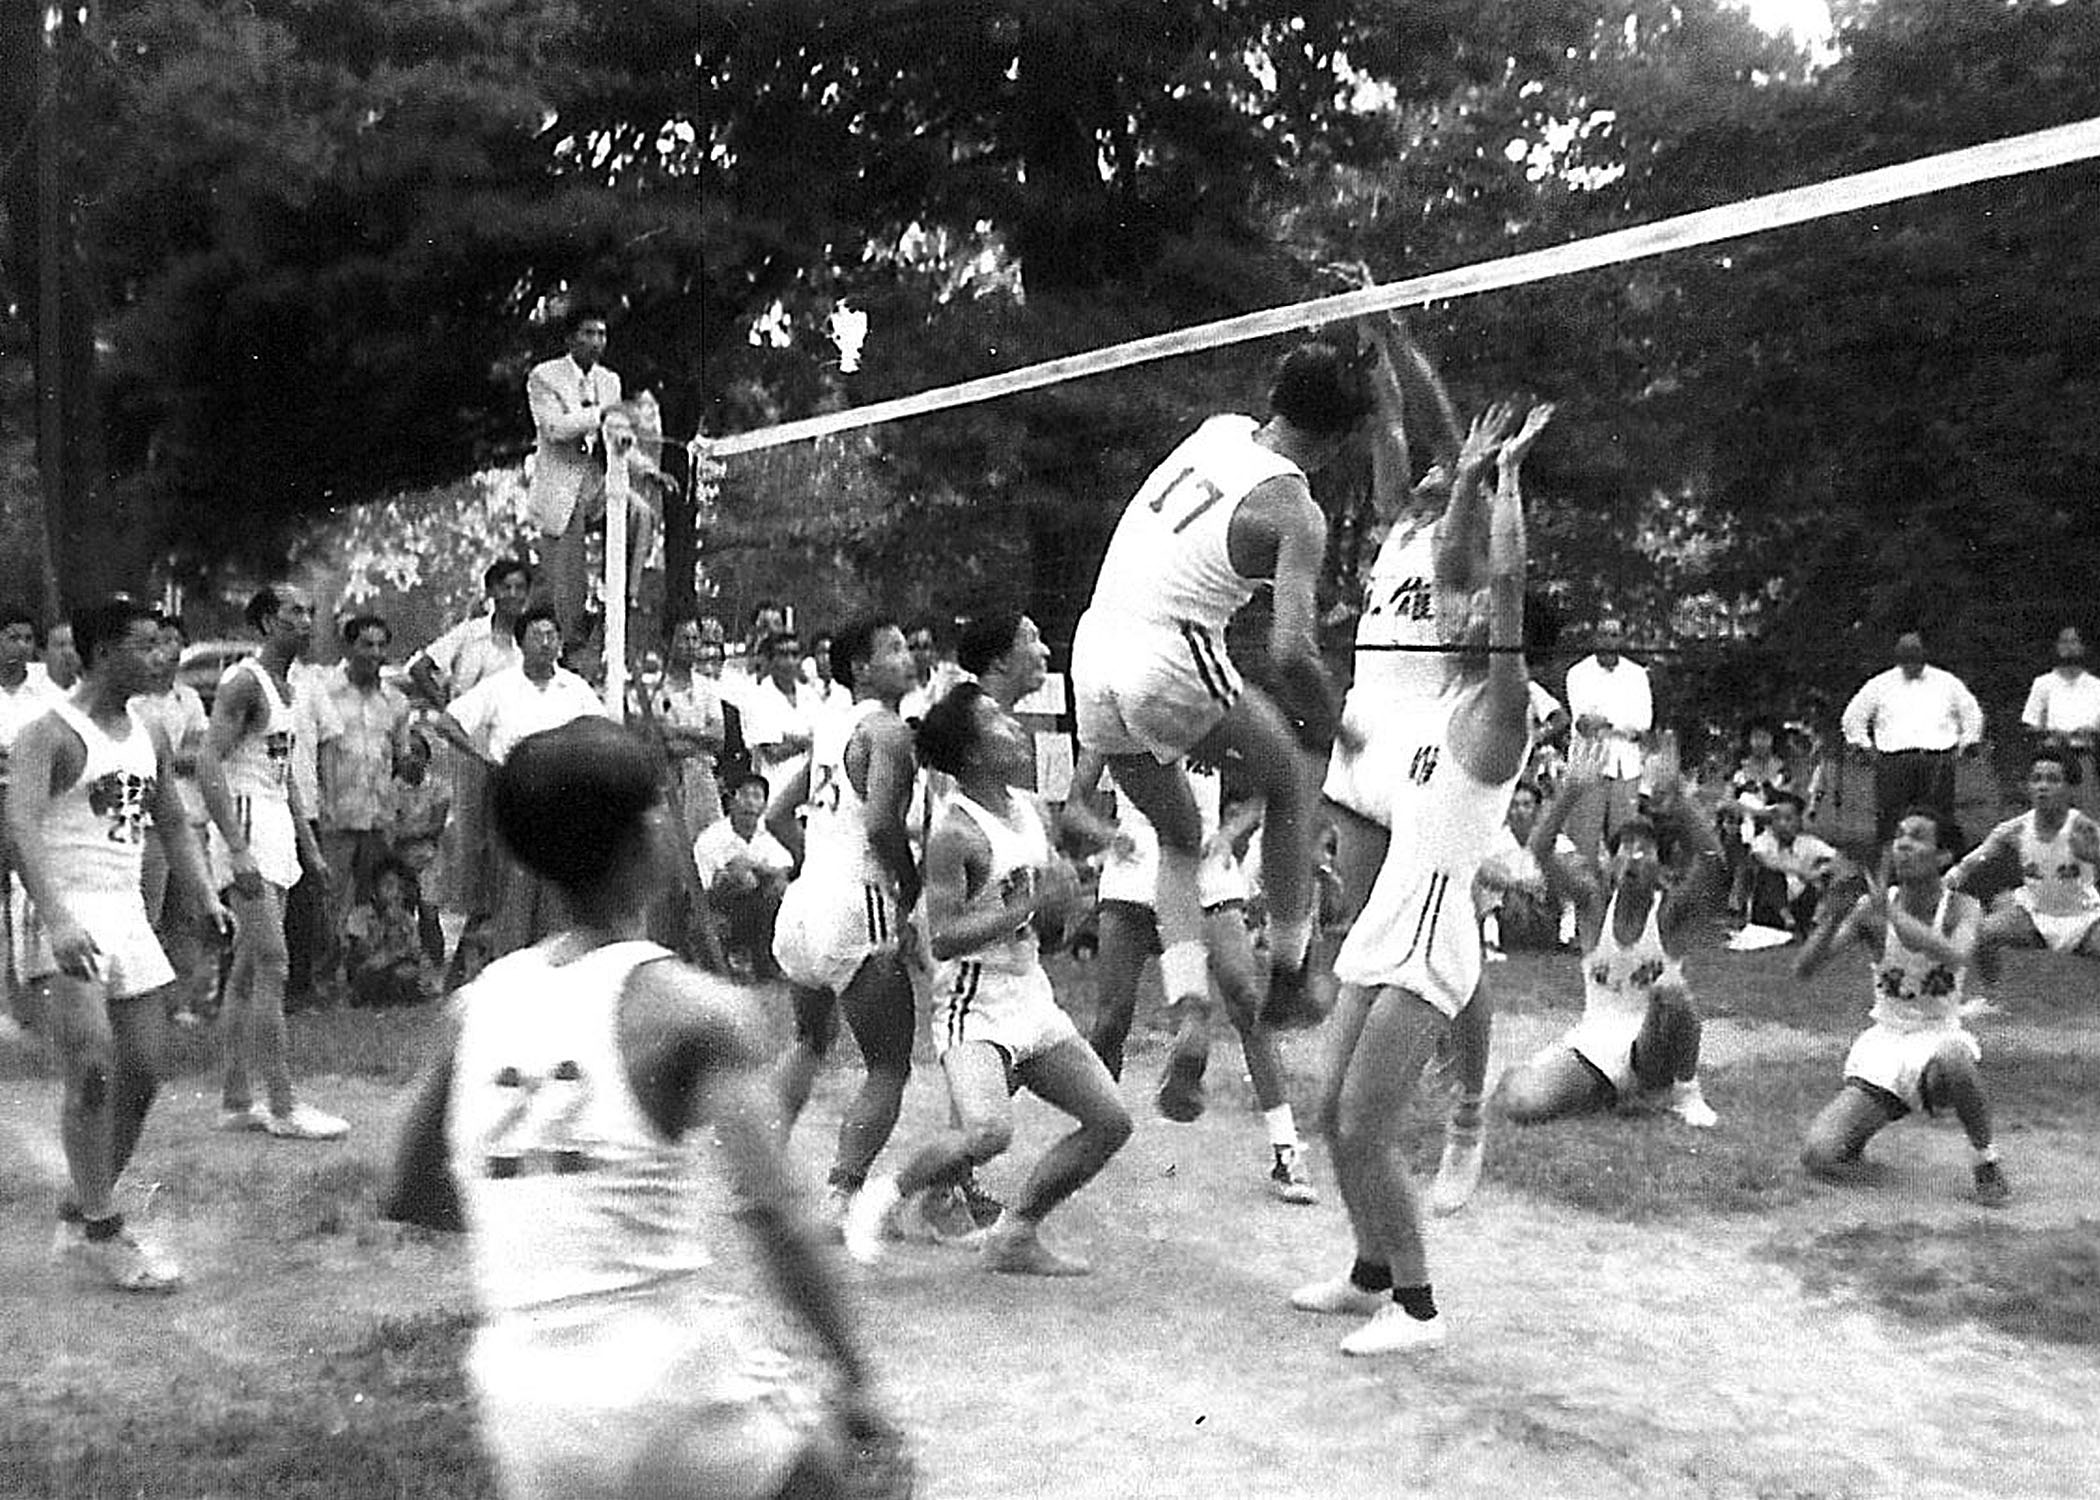 Fast paced: Members of Washington's Chinese Youth Club play 9-man volleyball in Washington in 1952. This version, usually played on city streets with rules stressing players' Chinese heritage, draws hundreds to tournaments. | COURTESY OF THE CHINESE YOUTH CLUB